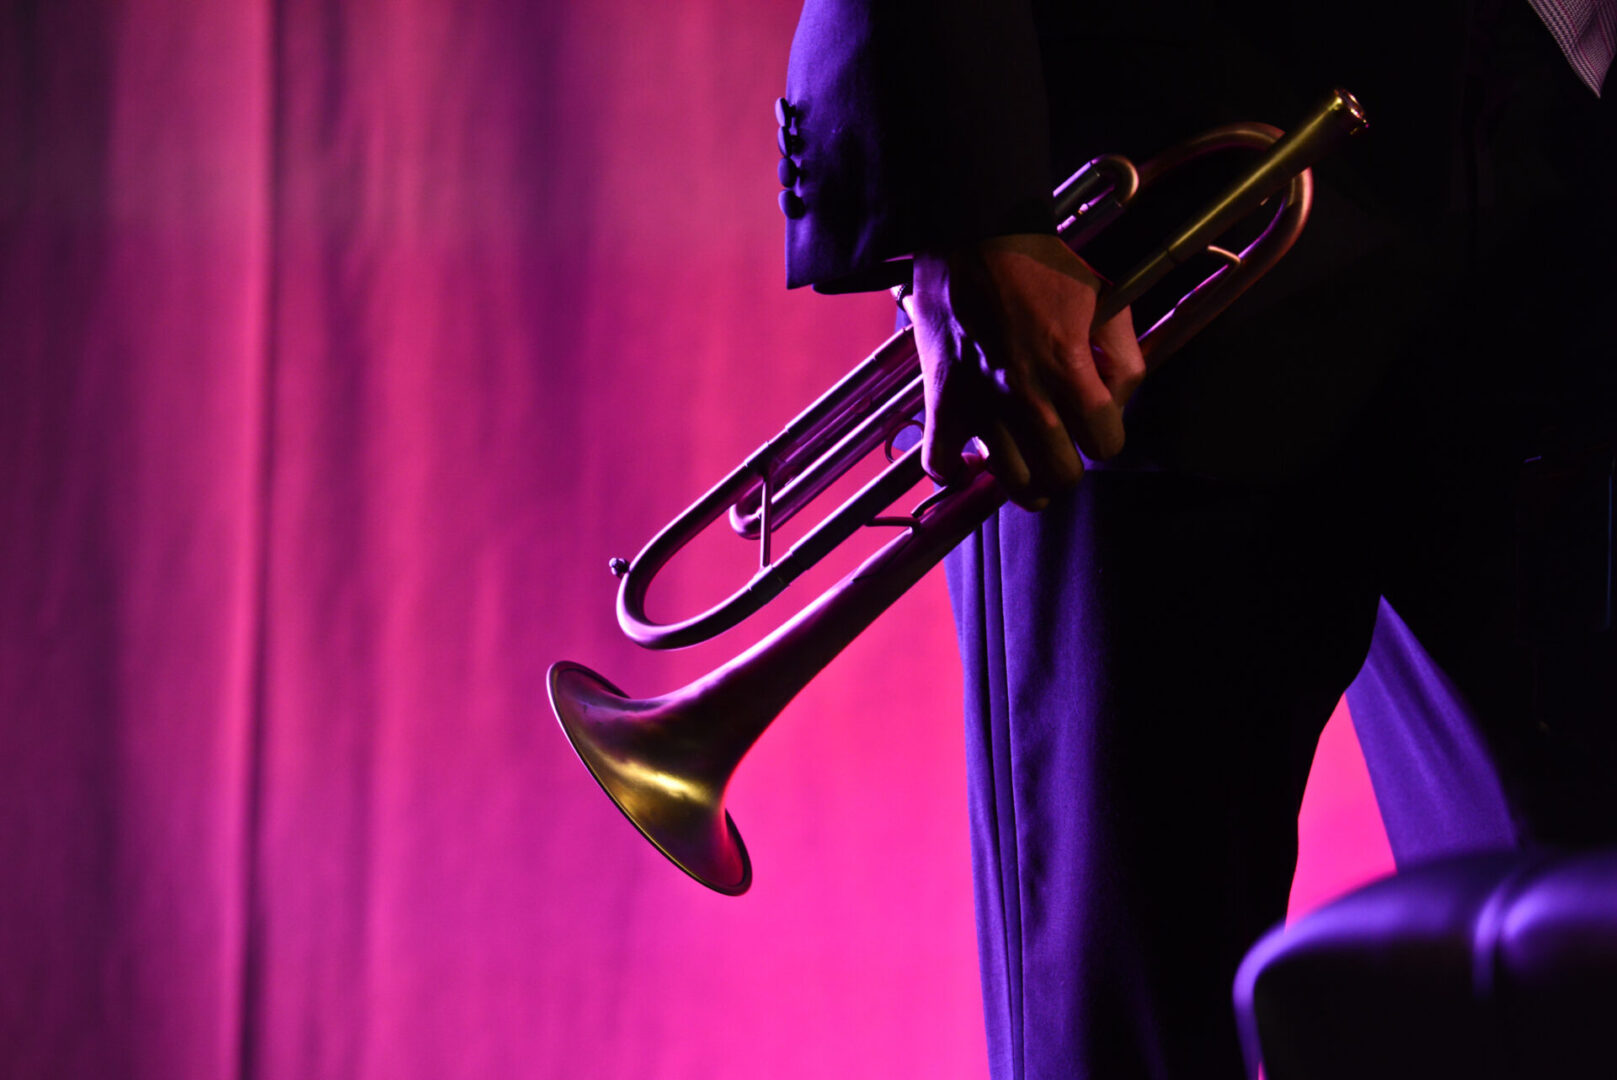 A person playing the trumpet in front of purple lights.